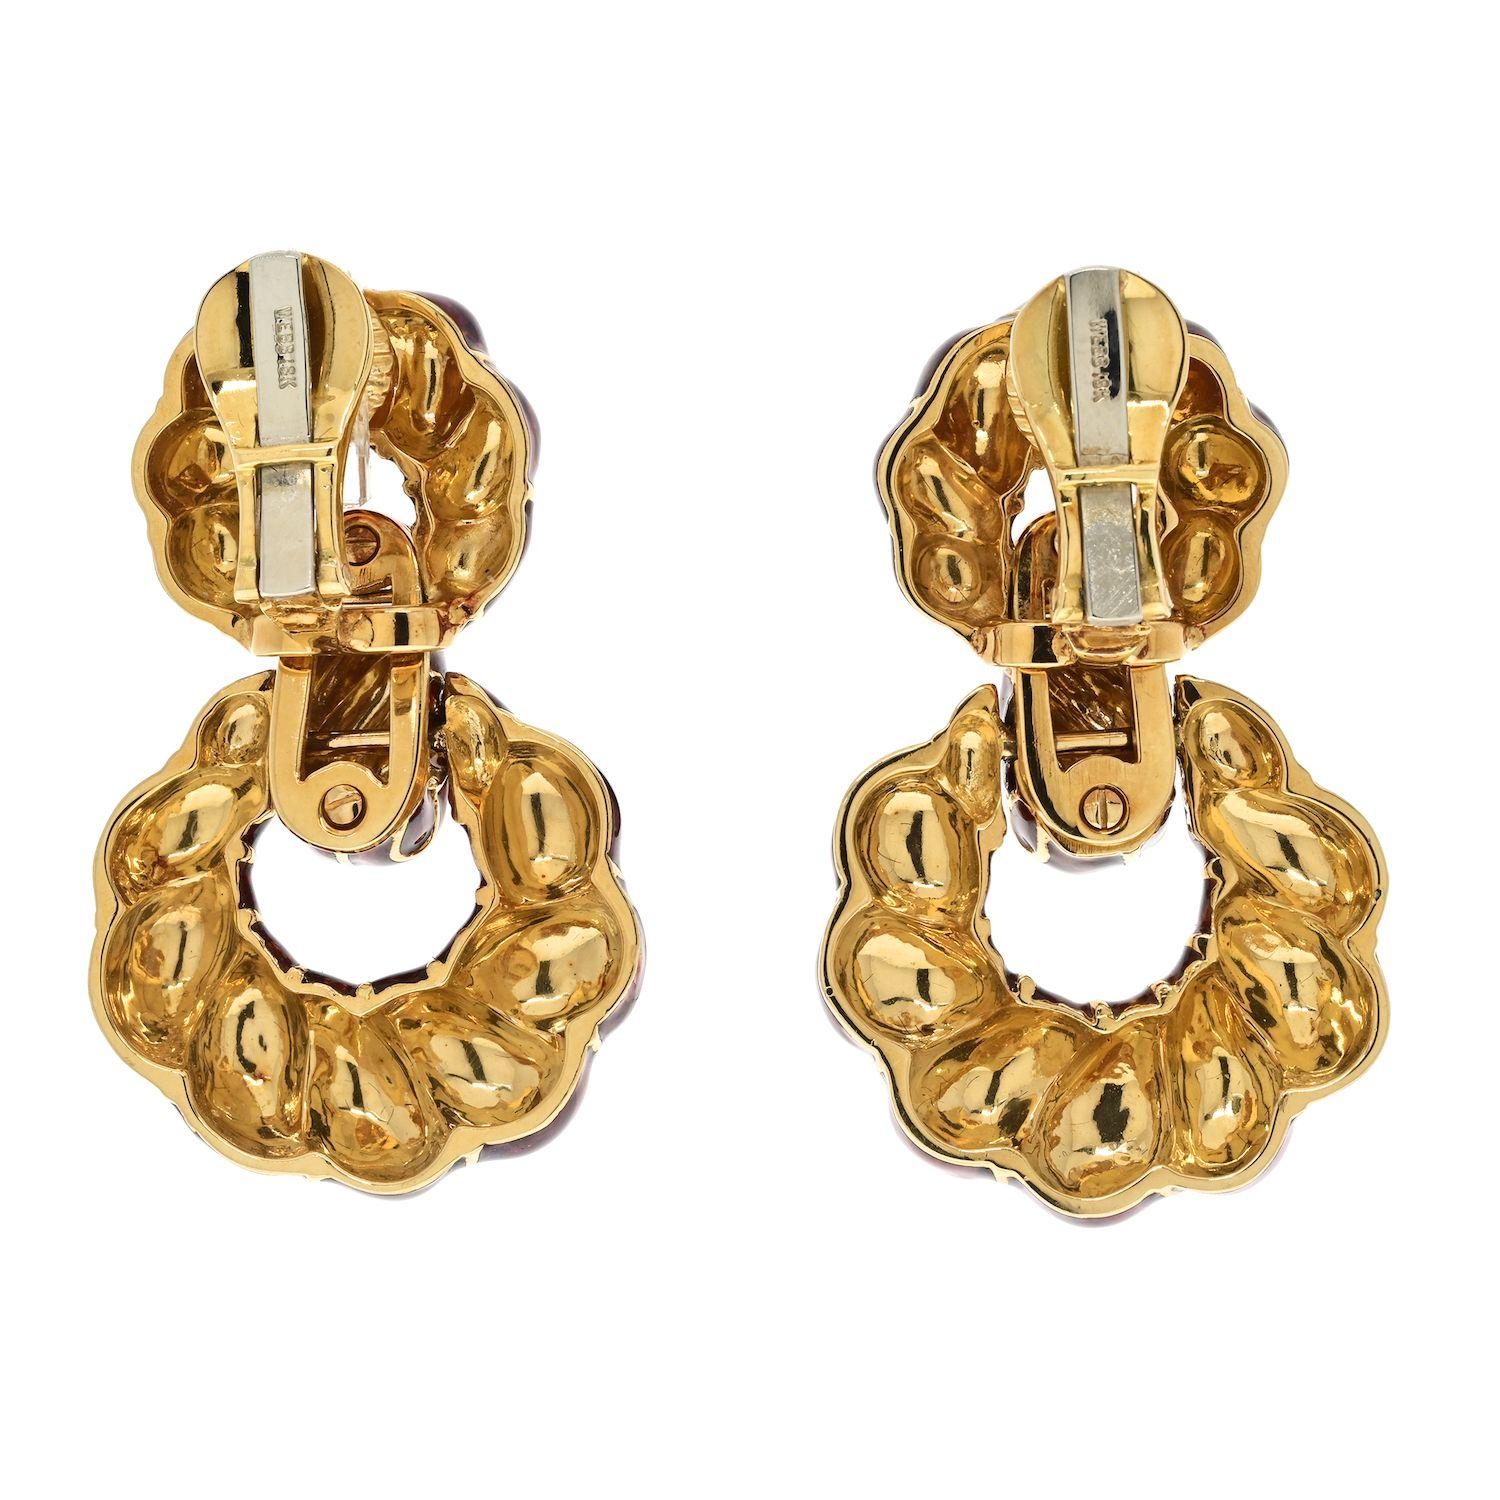 The David Webb Platinum & 18K Yellow Gold Fluted Red Enamel Door Knockers Clip Earrings are a bold and striking pair of earrings that capture attention with their unique design and vibrant color. Crafted in a combination in 18K yellow gold, these